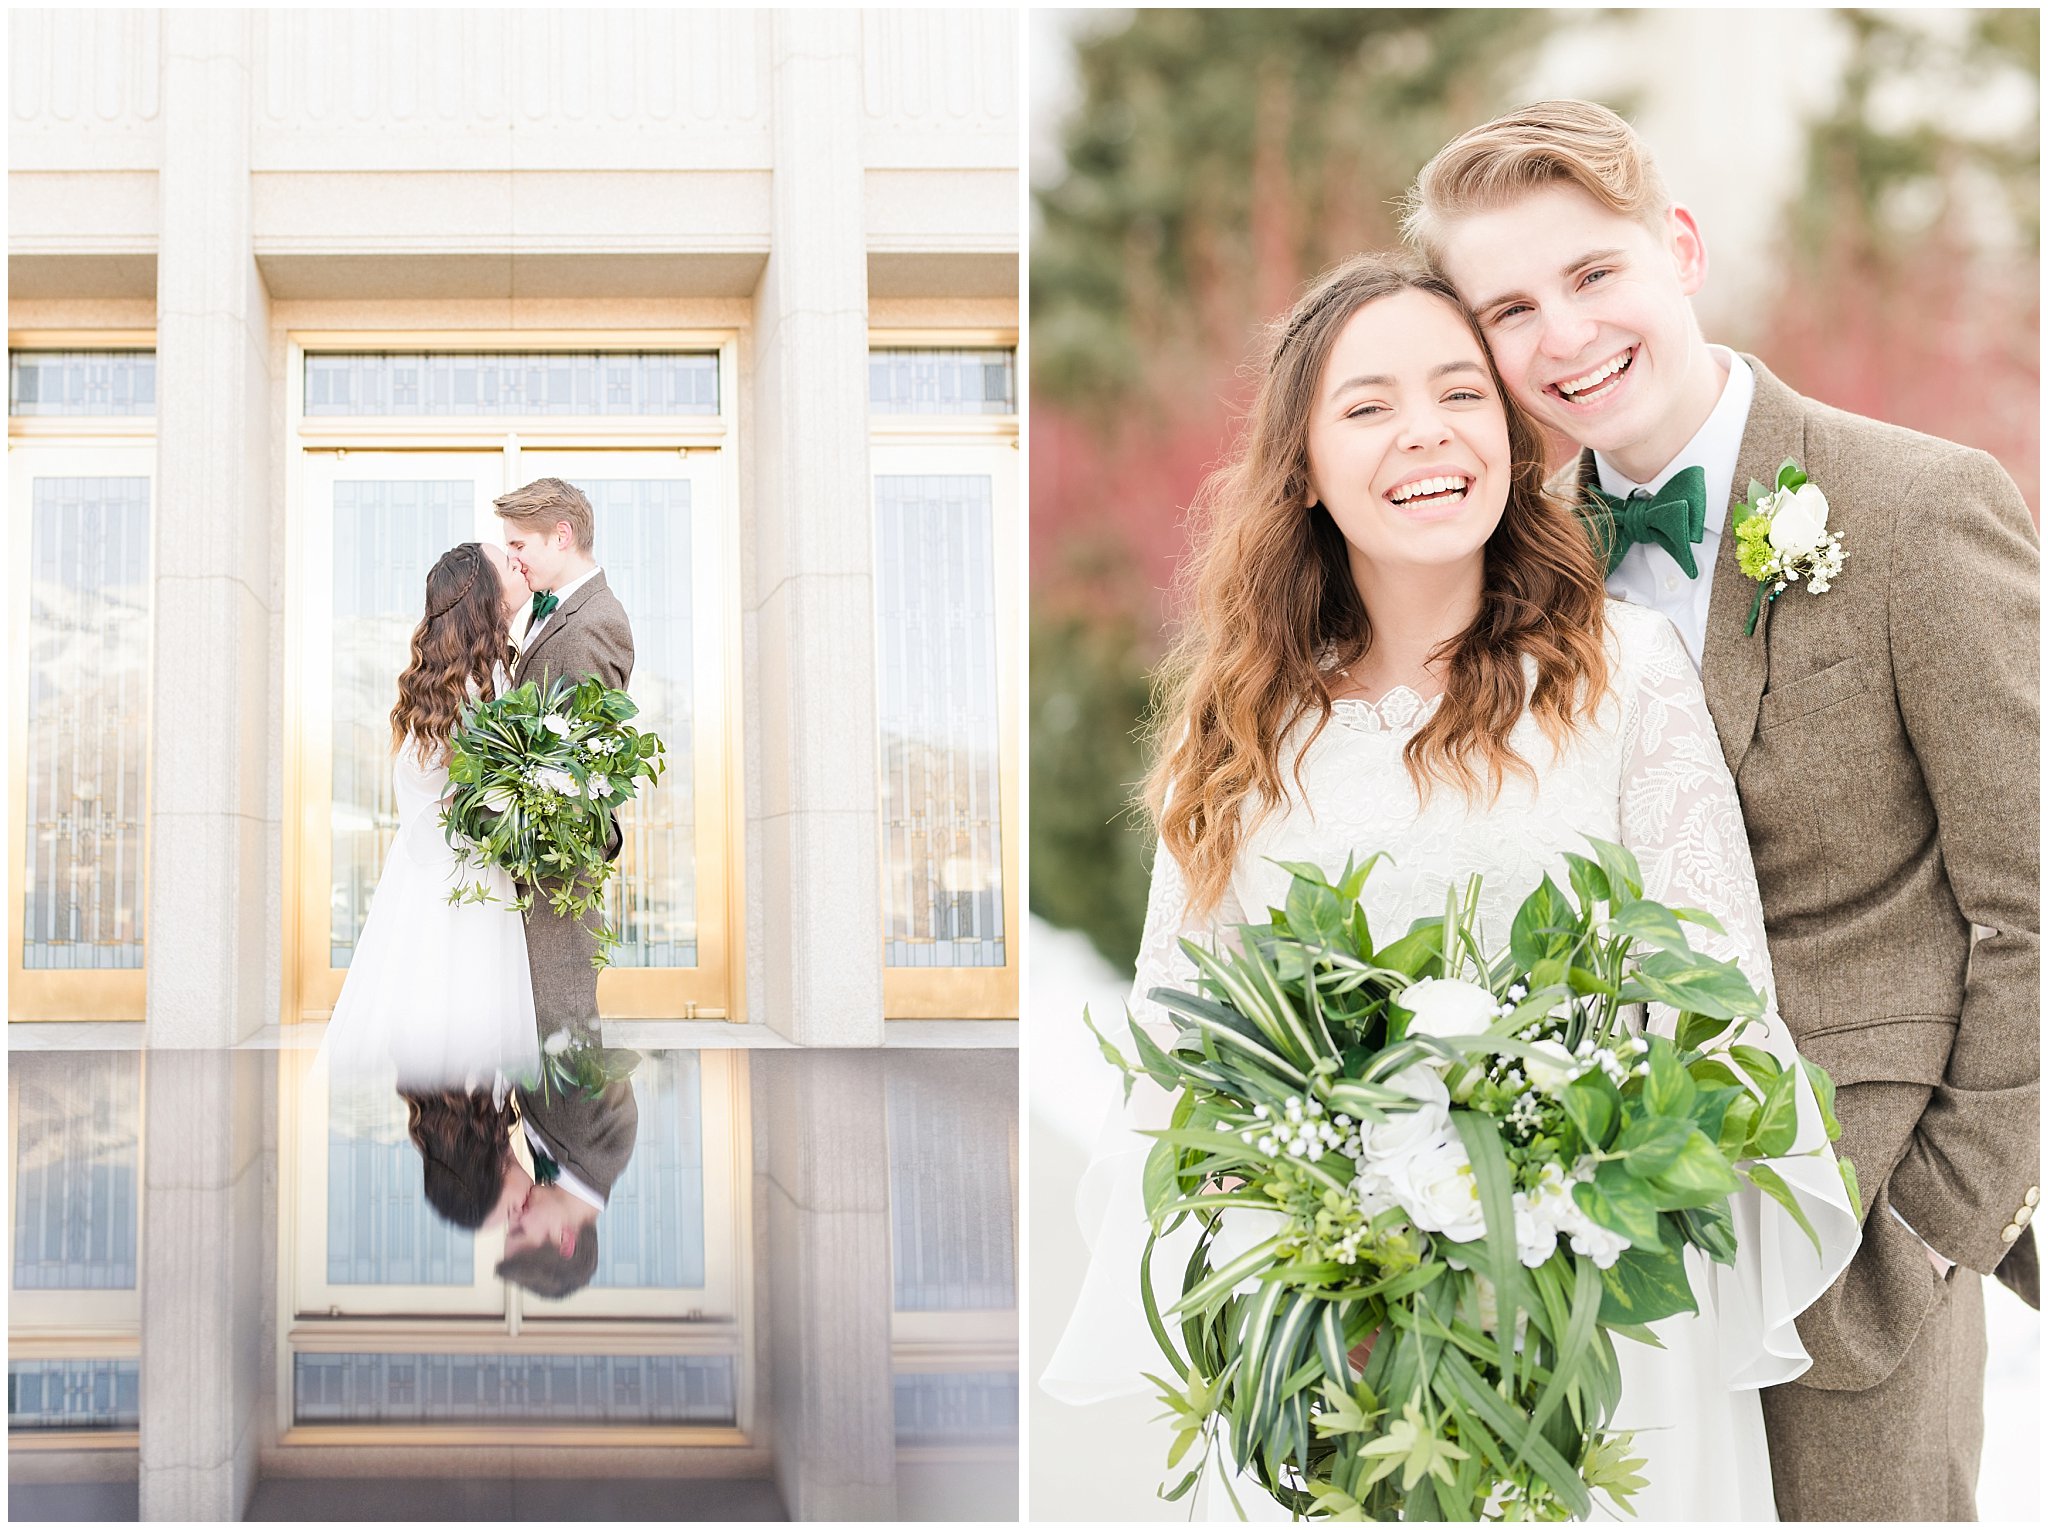 Bride and groom portraits during Ogden Temple winter wedding | Brown, Emerald Green, and white wedding | Ogden Temple and Sweet Magnolia Wedding | Jessie and Dallin Photography